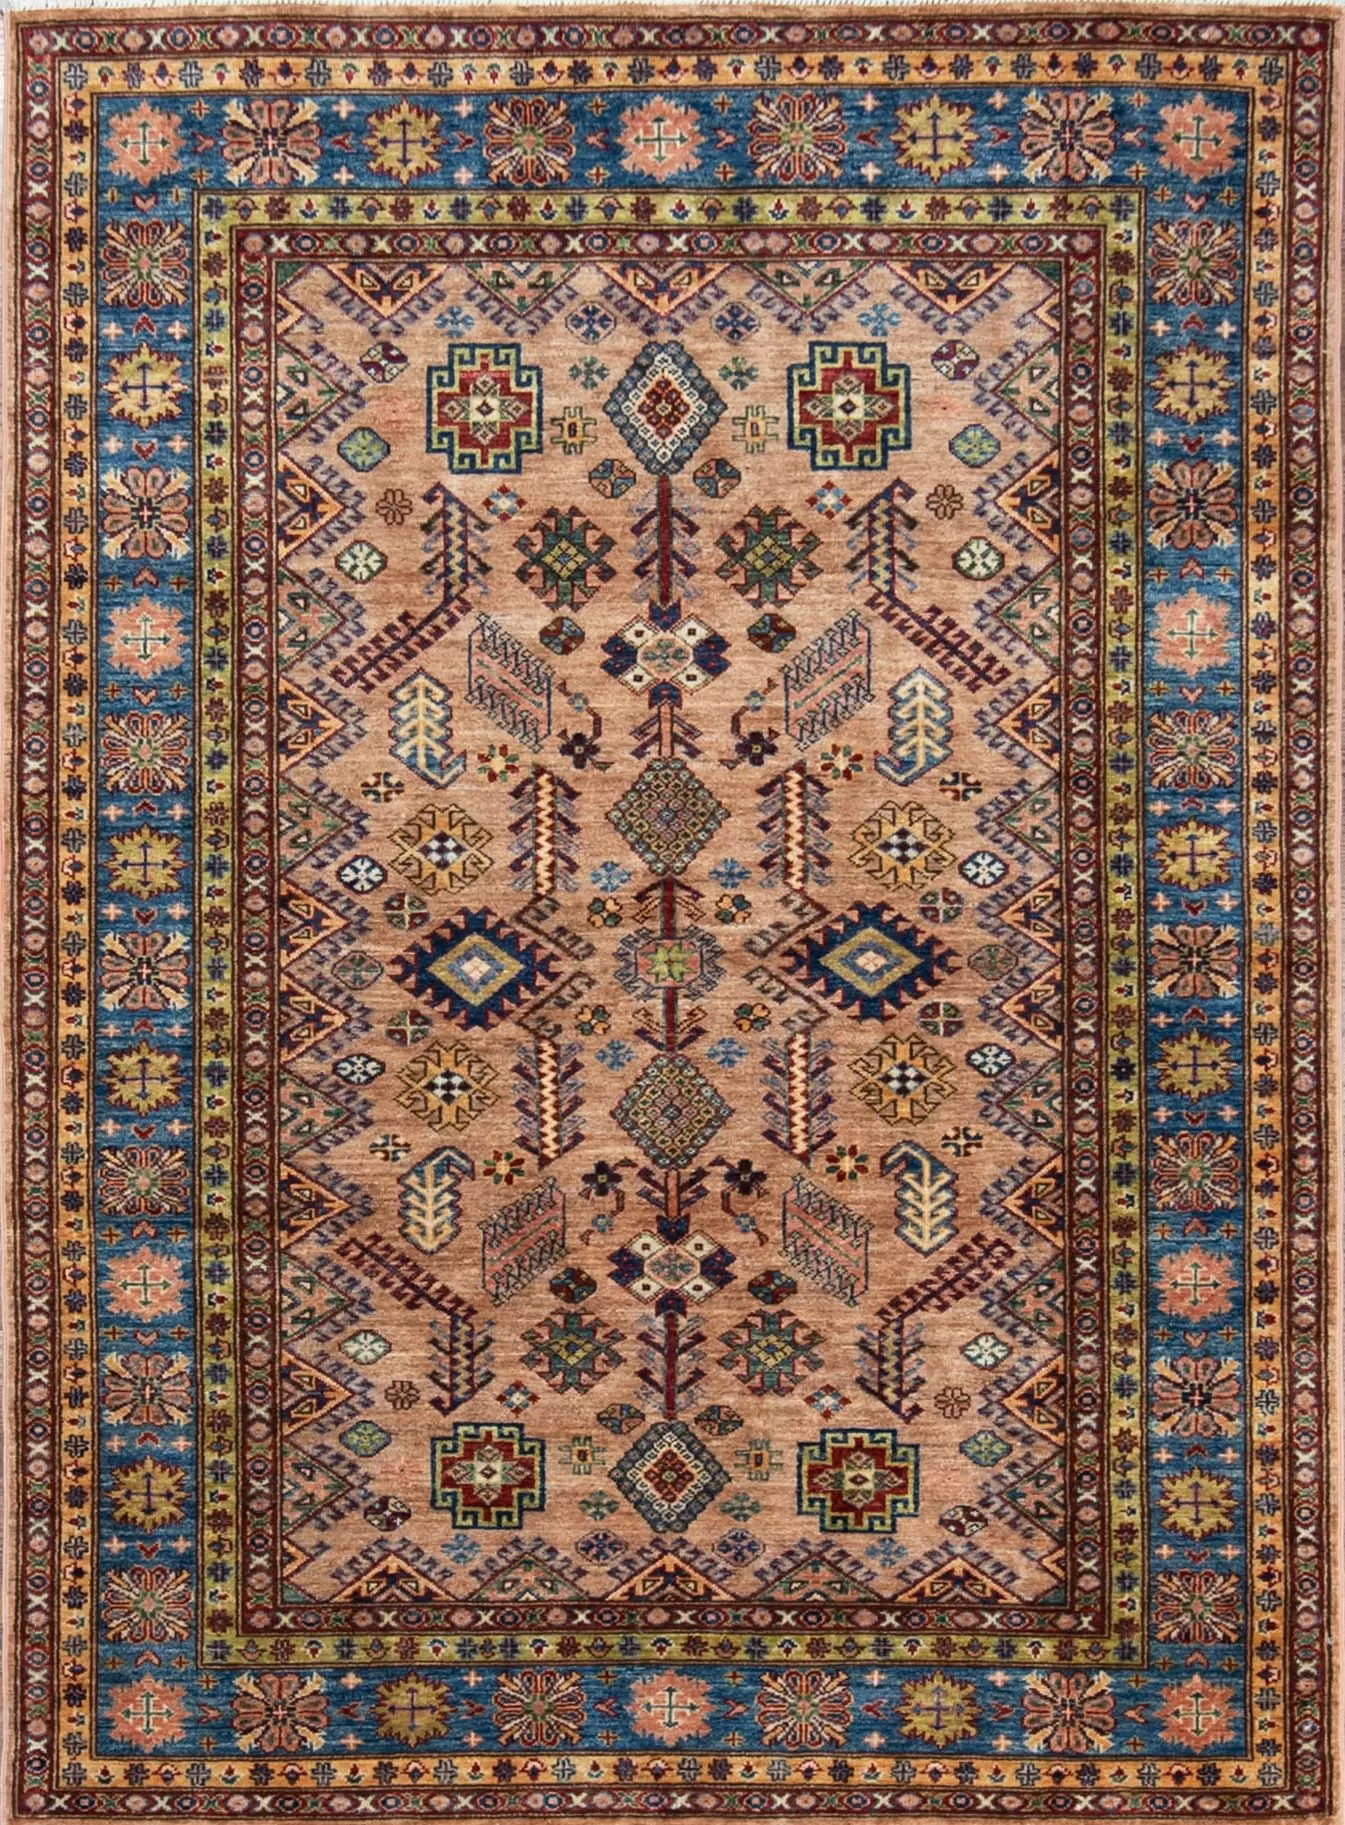 Handmade oriental rug in geometric Kazak style in brown and blue color. Size 5.1x7.